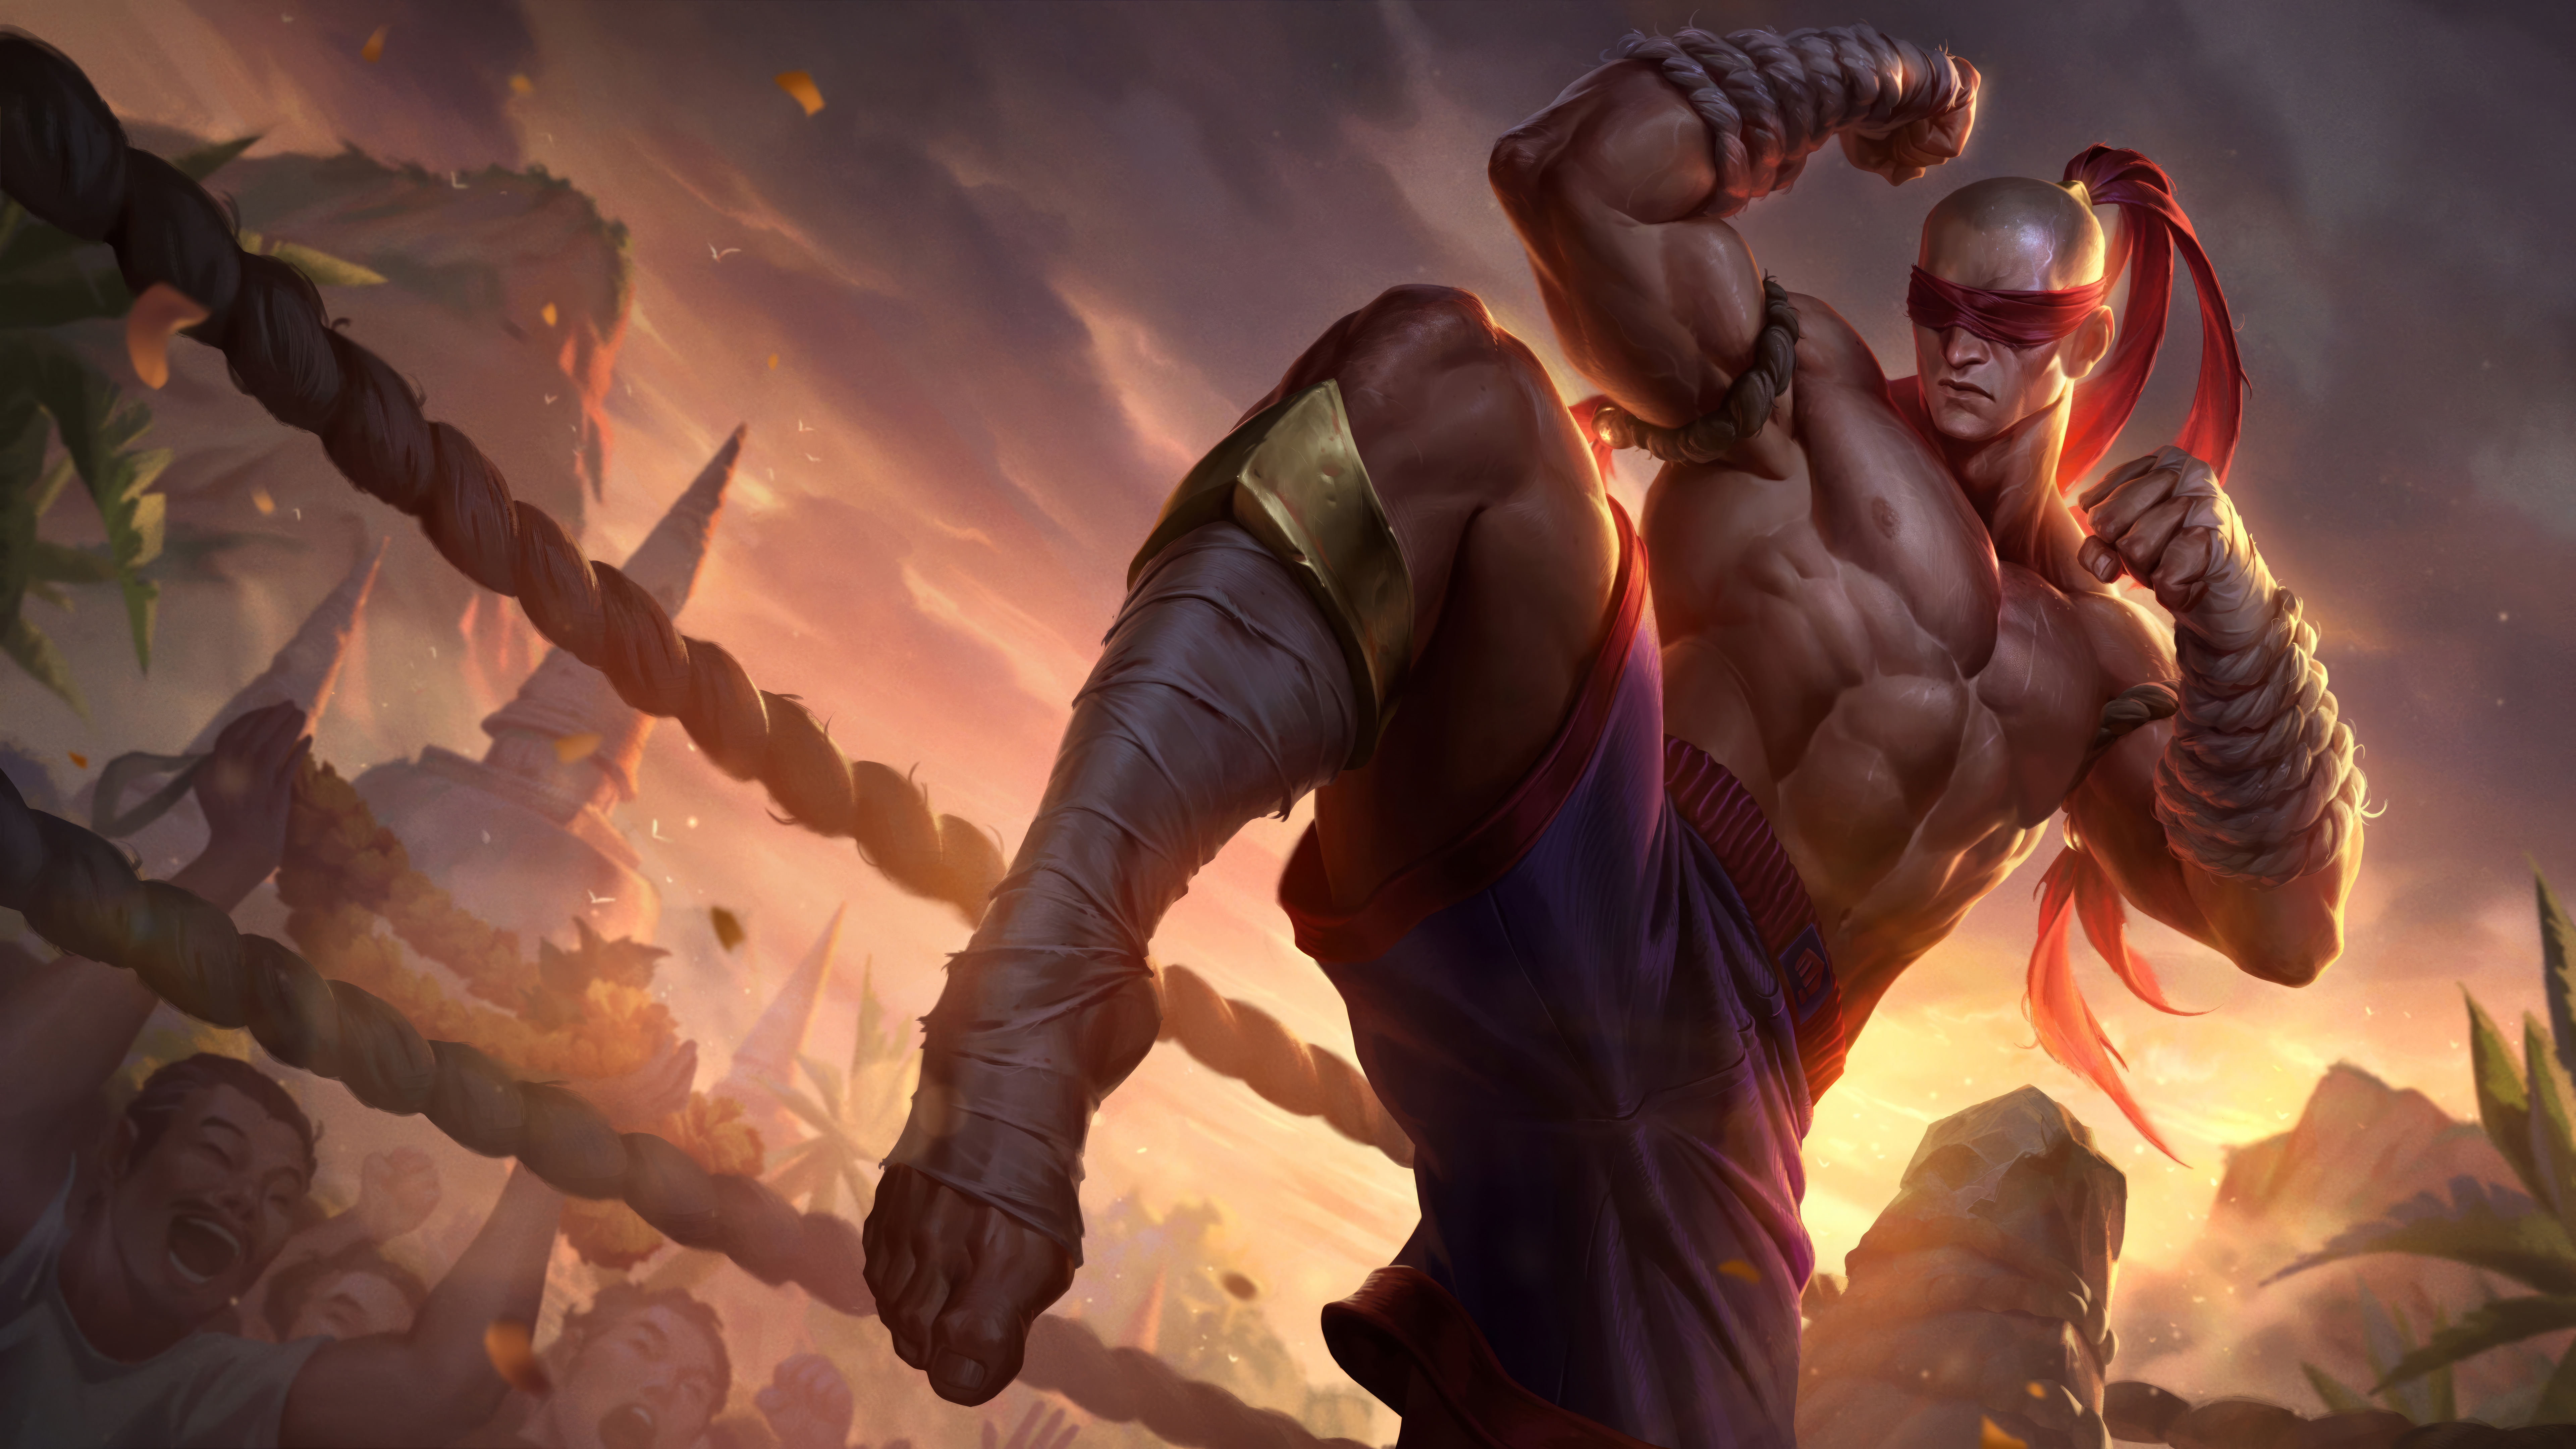 General 7680x4320 Lee Sin (League of Legends) digital art Riot Games GZG video games League of Legends muscles video game characters 4K sunset sunset glow blindfold covered eye(s) open mouth crowds leaves toes sky clouds standing standing on one leg fist shirtless bandages petals video game men video game art shorts